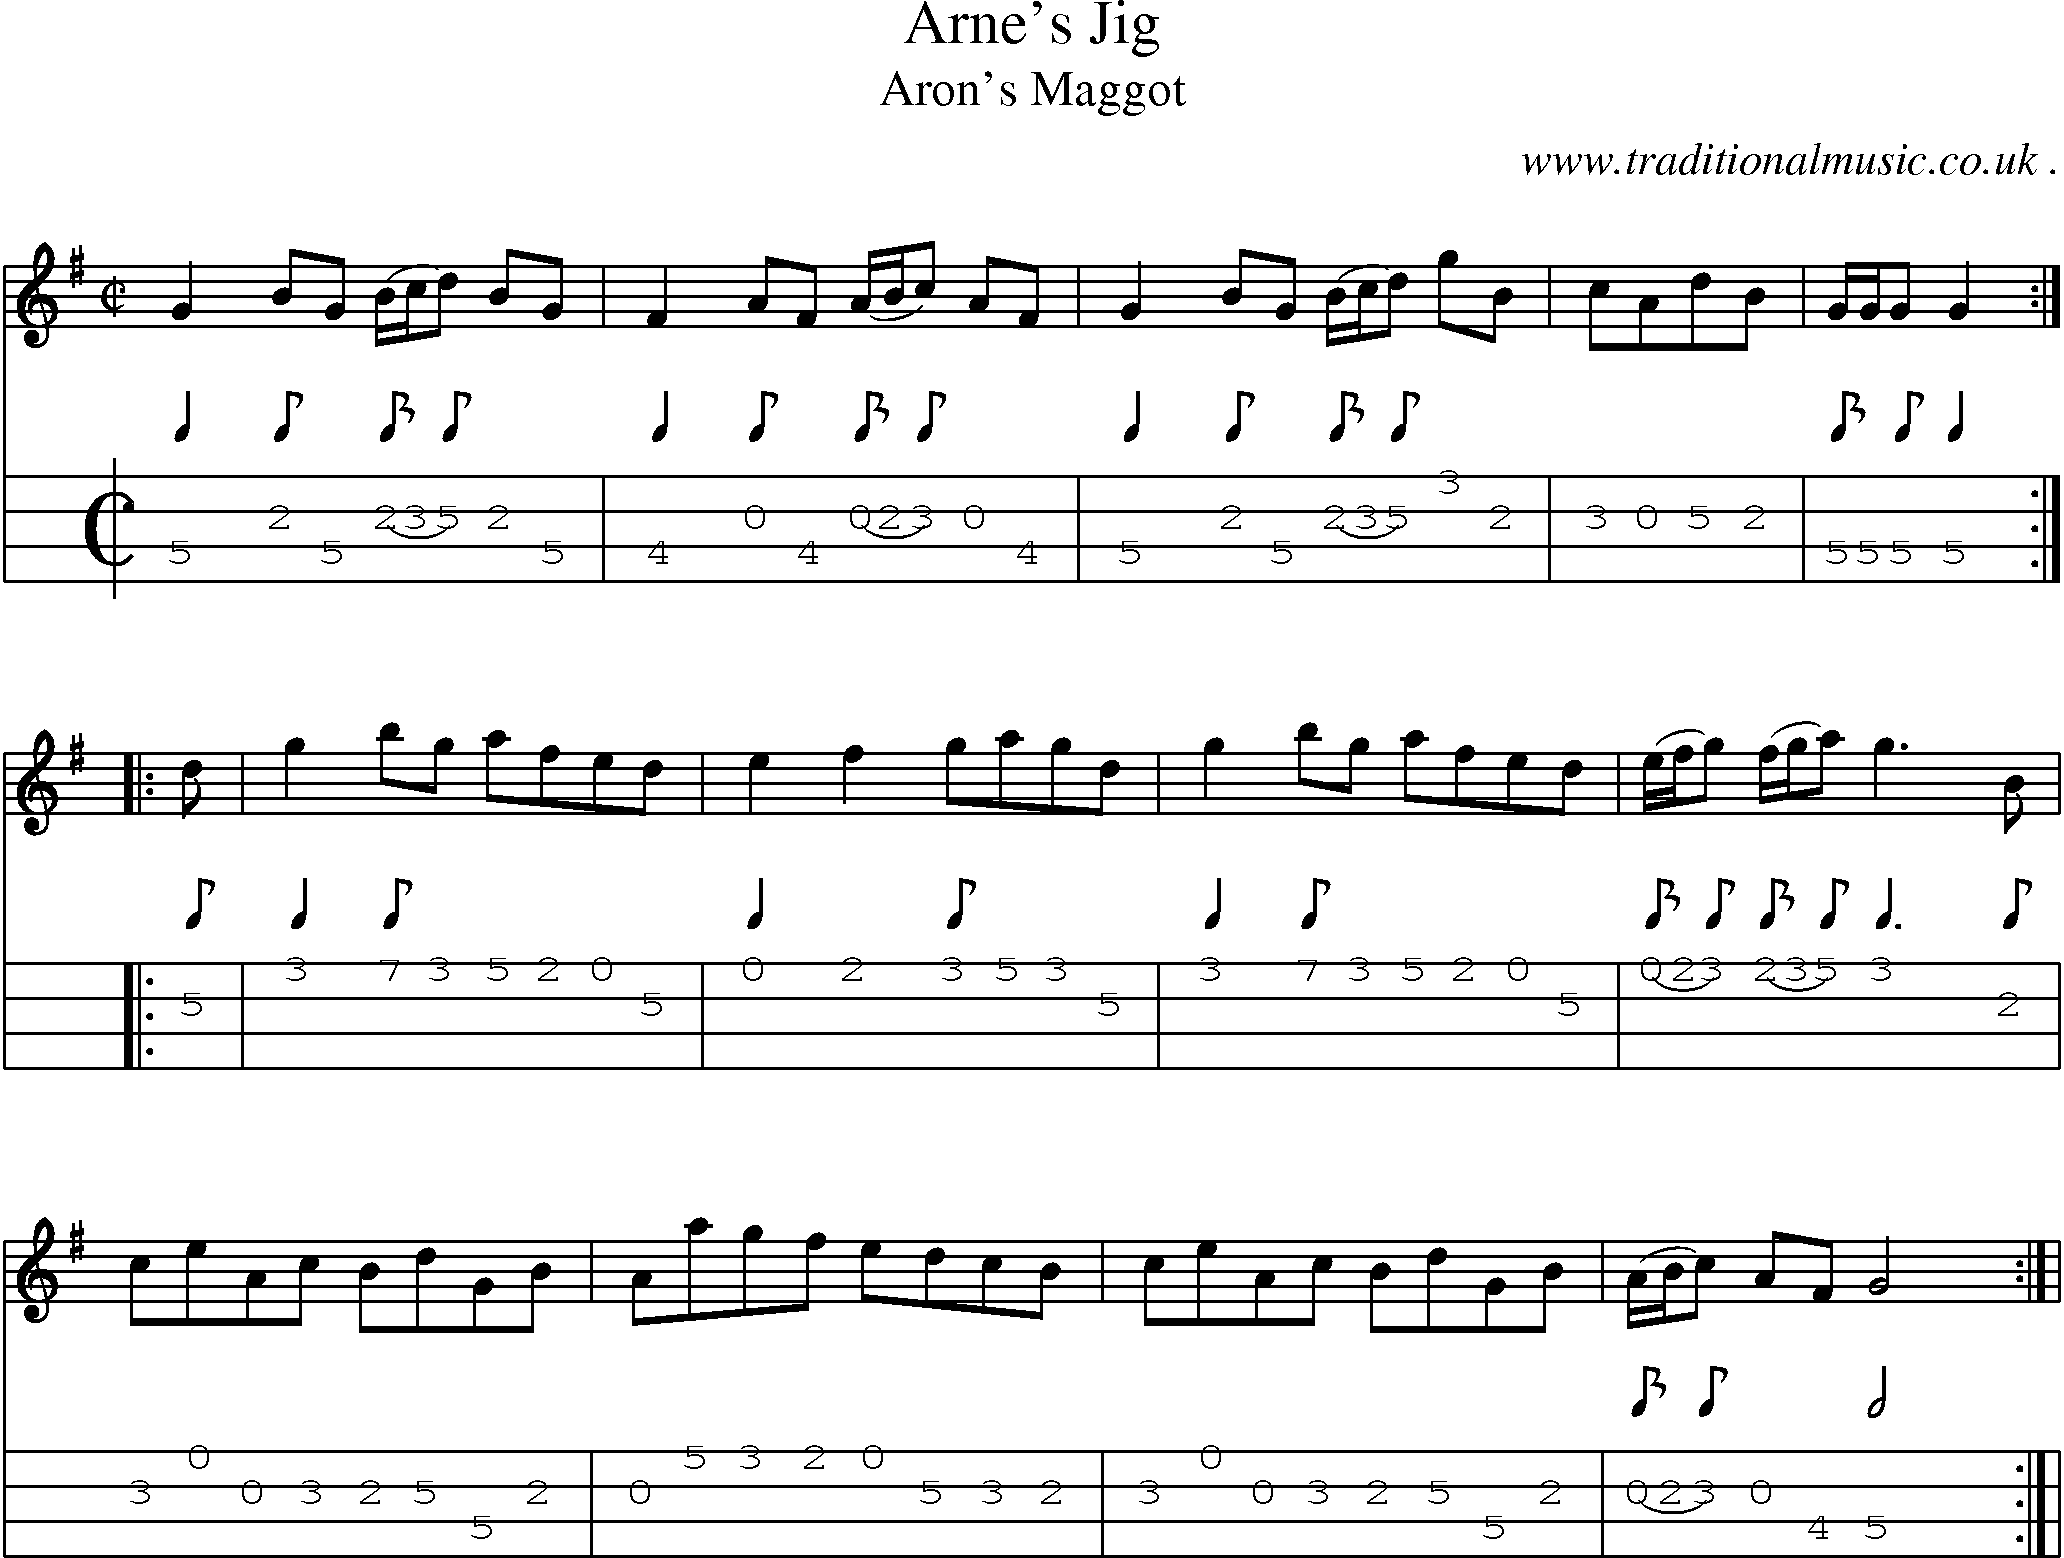 Sheet-Music and Mandolin Tabs for Arnes Jig